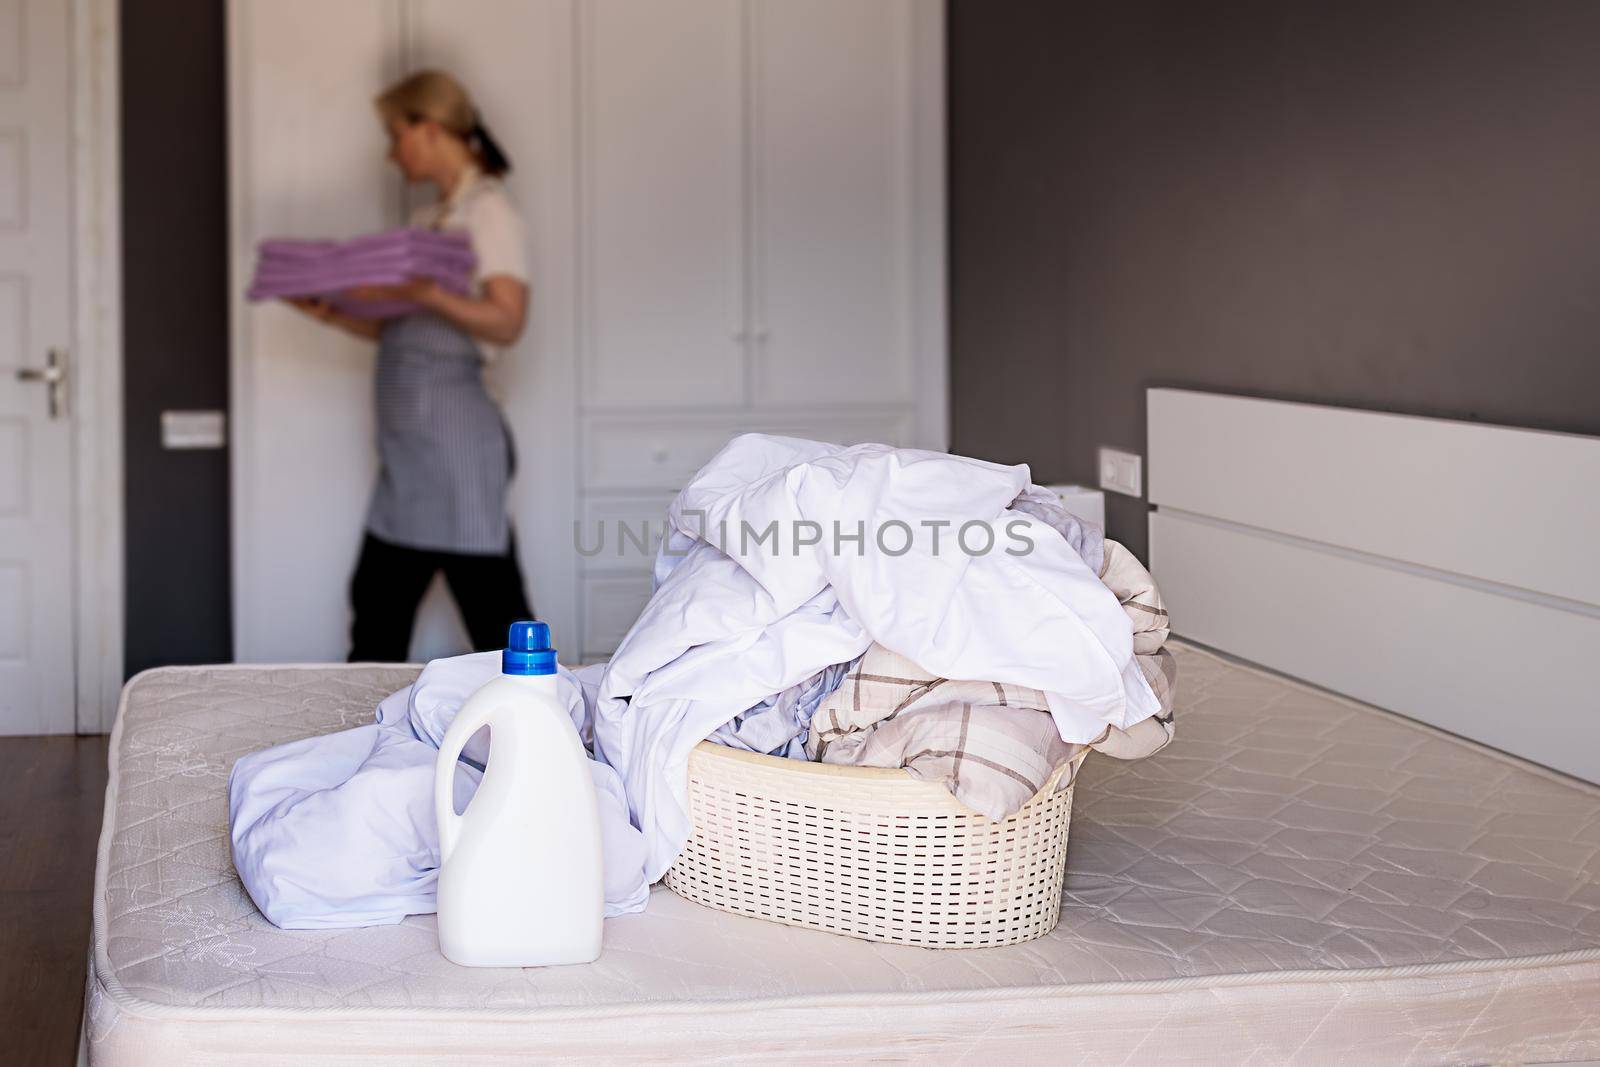 Staff cleans the hotel room, changes bed linen. Liquid laundry detergent mockup by Ramanouskaya